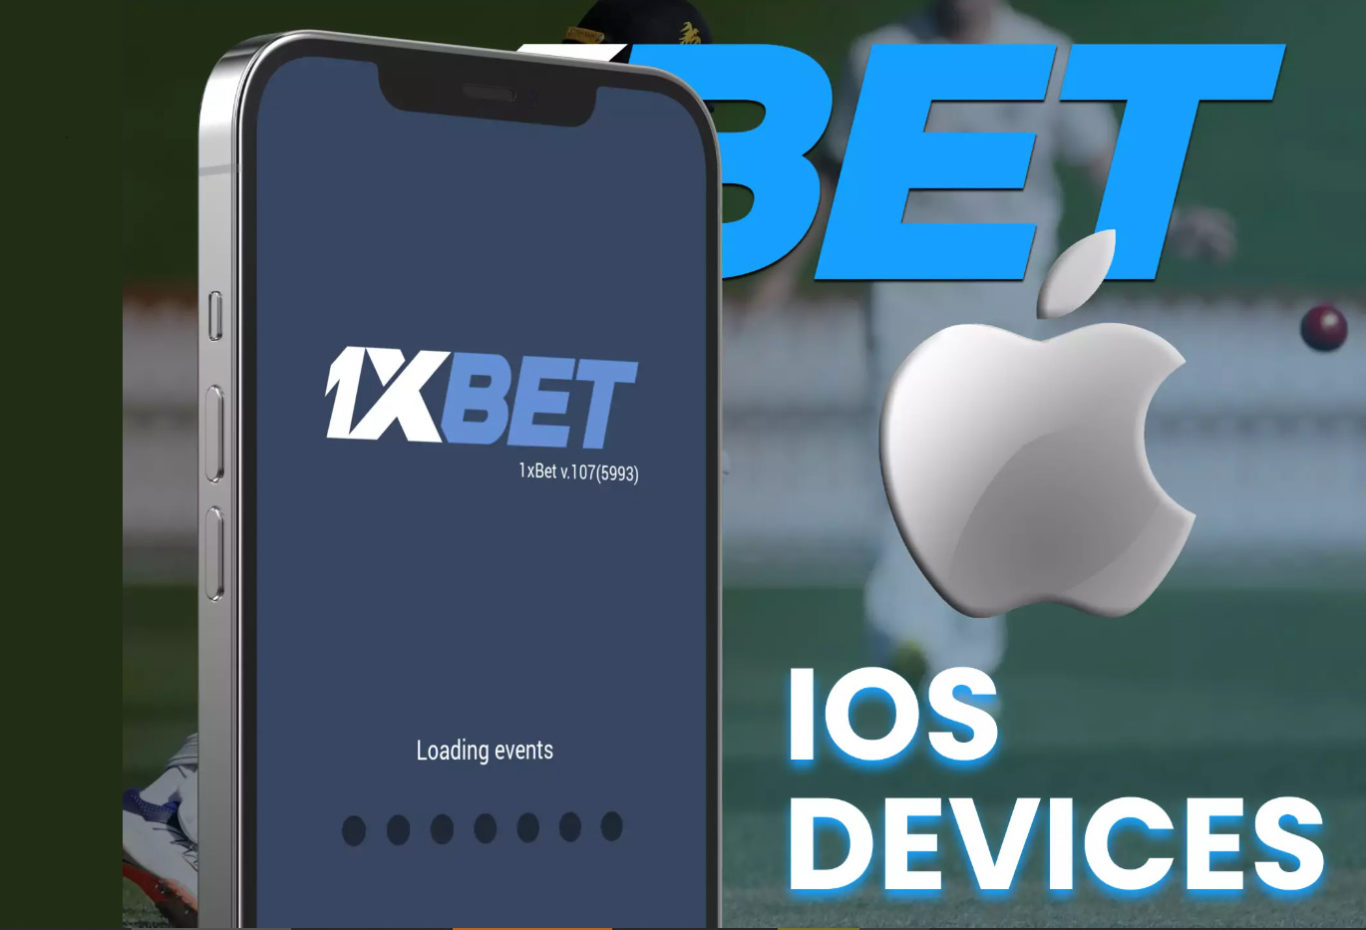 1xBet App for iPhone